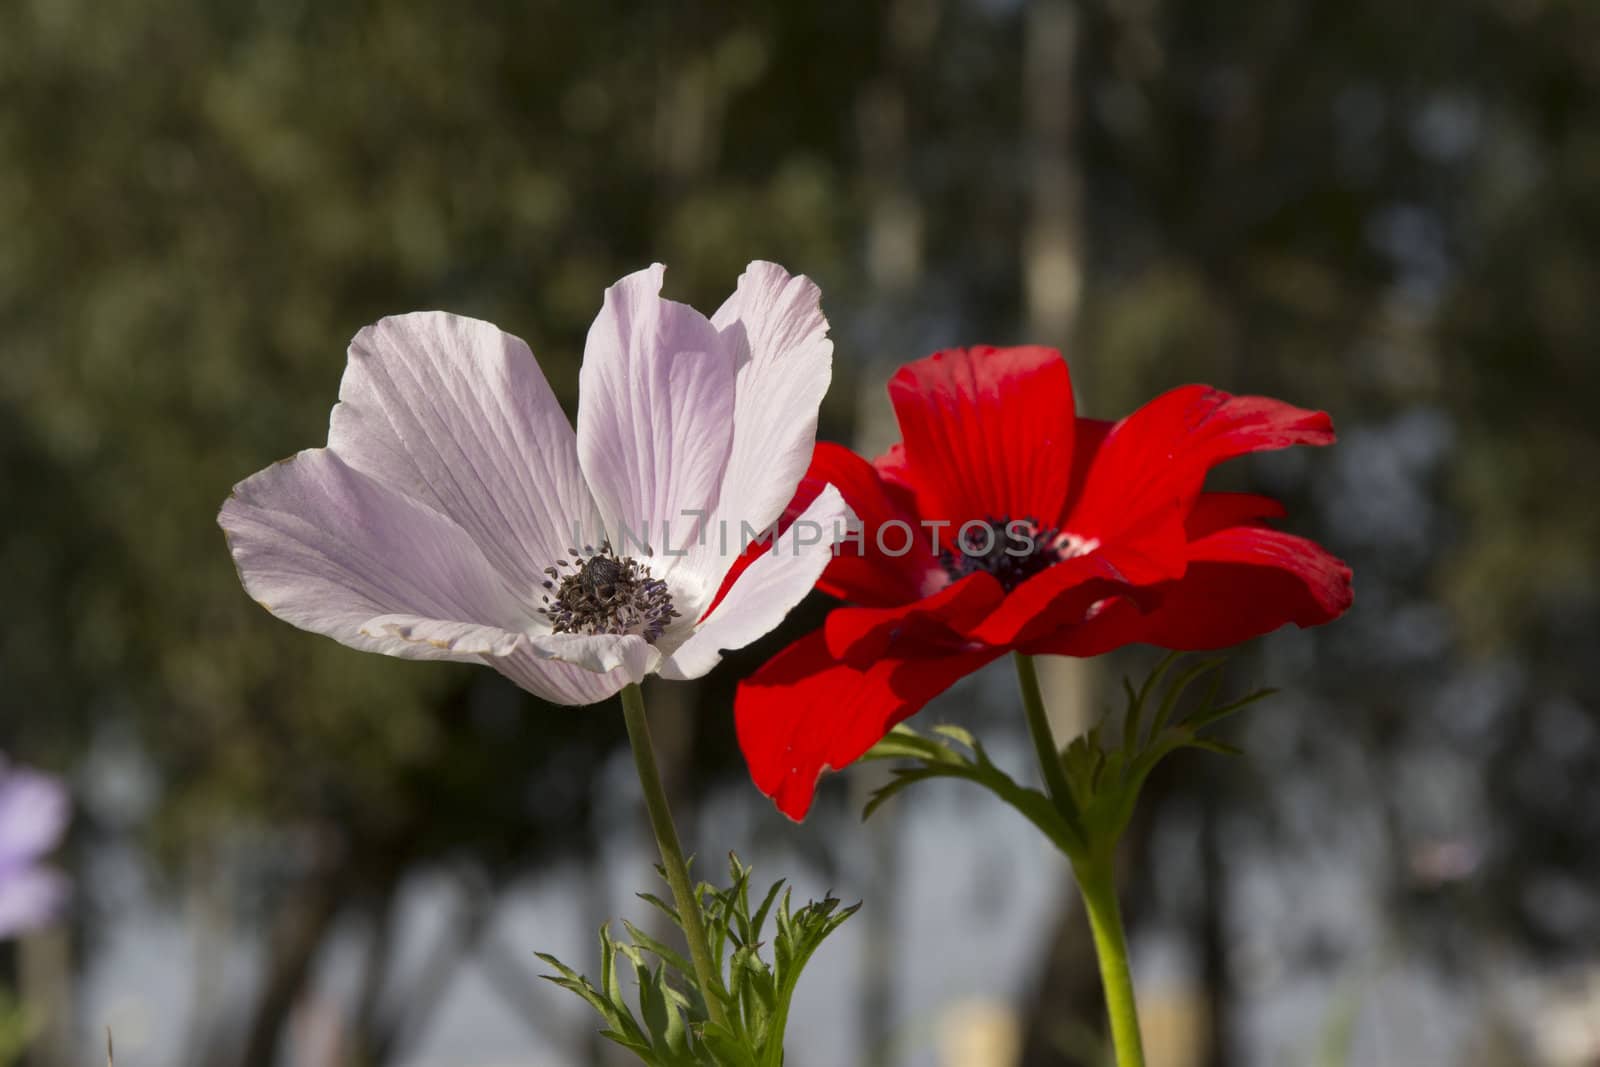 Blooming in the wild nature flowers Crown Anemones ( Anemone Coronaria, Calanit)